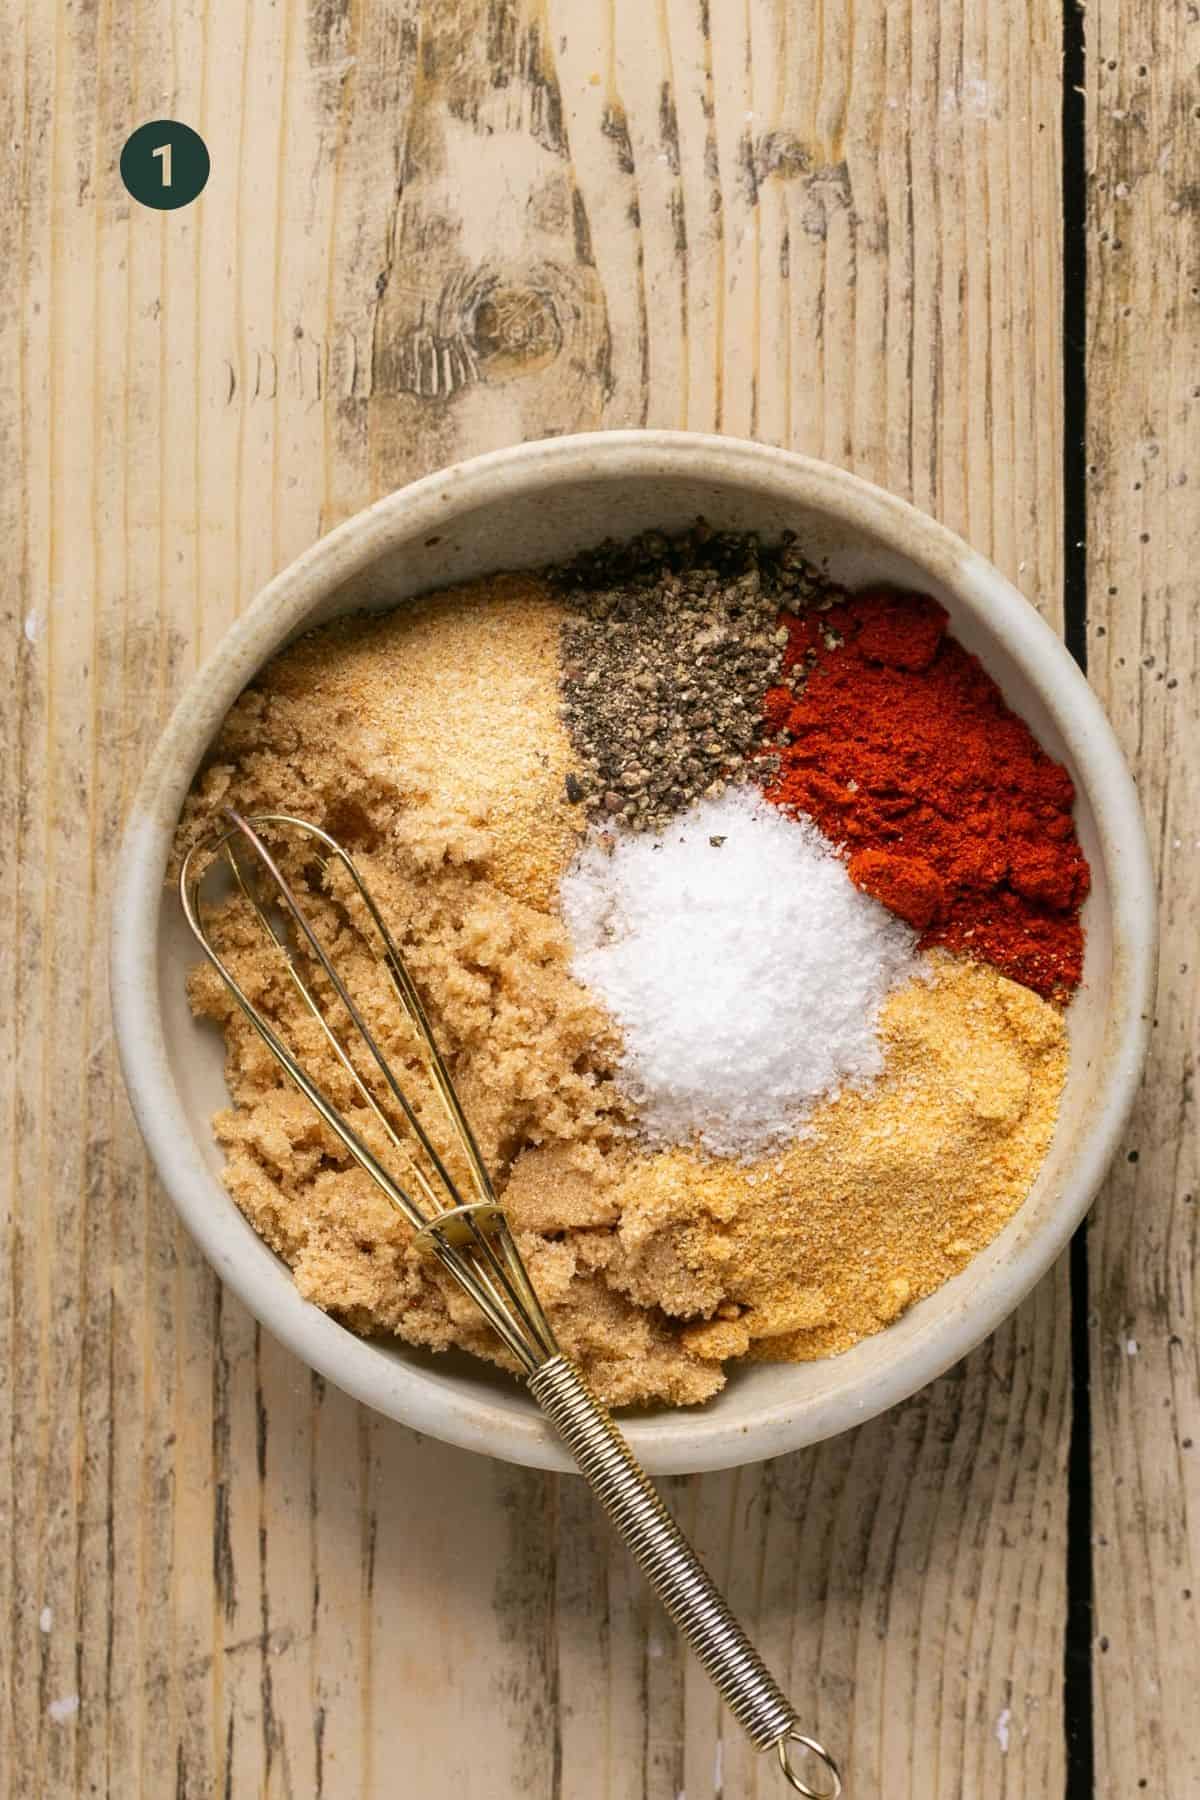 Dry rub ingredients in a small mixing bowl. 